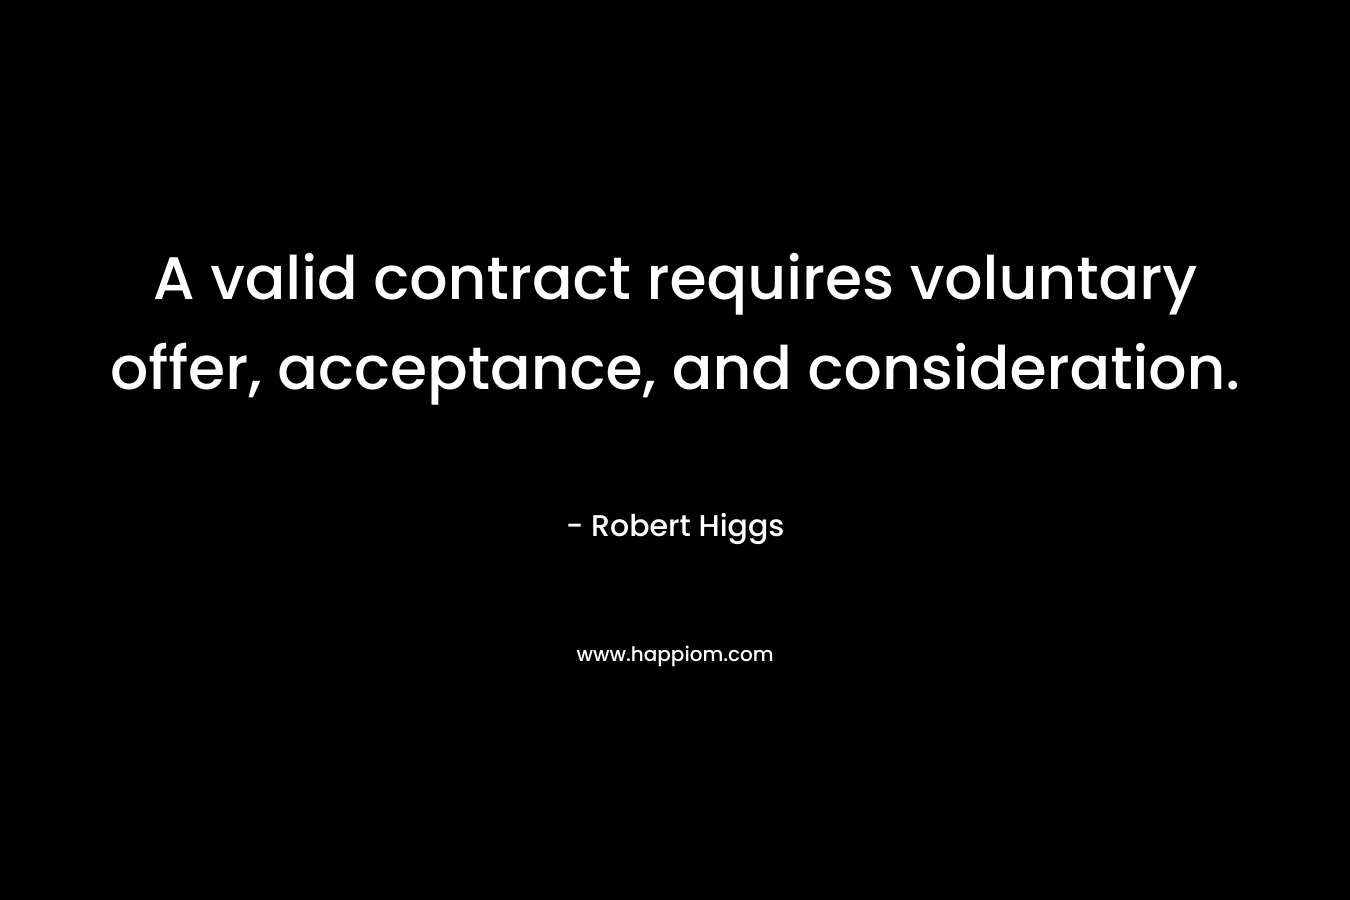 A valid contract requires voluntary offer, acceptance, and consideration. – Robert Higgs